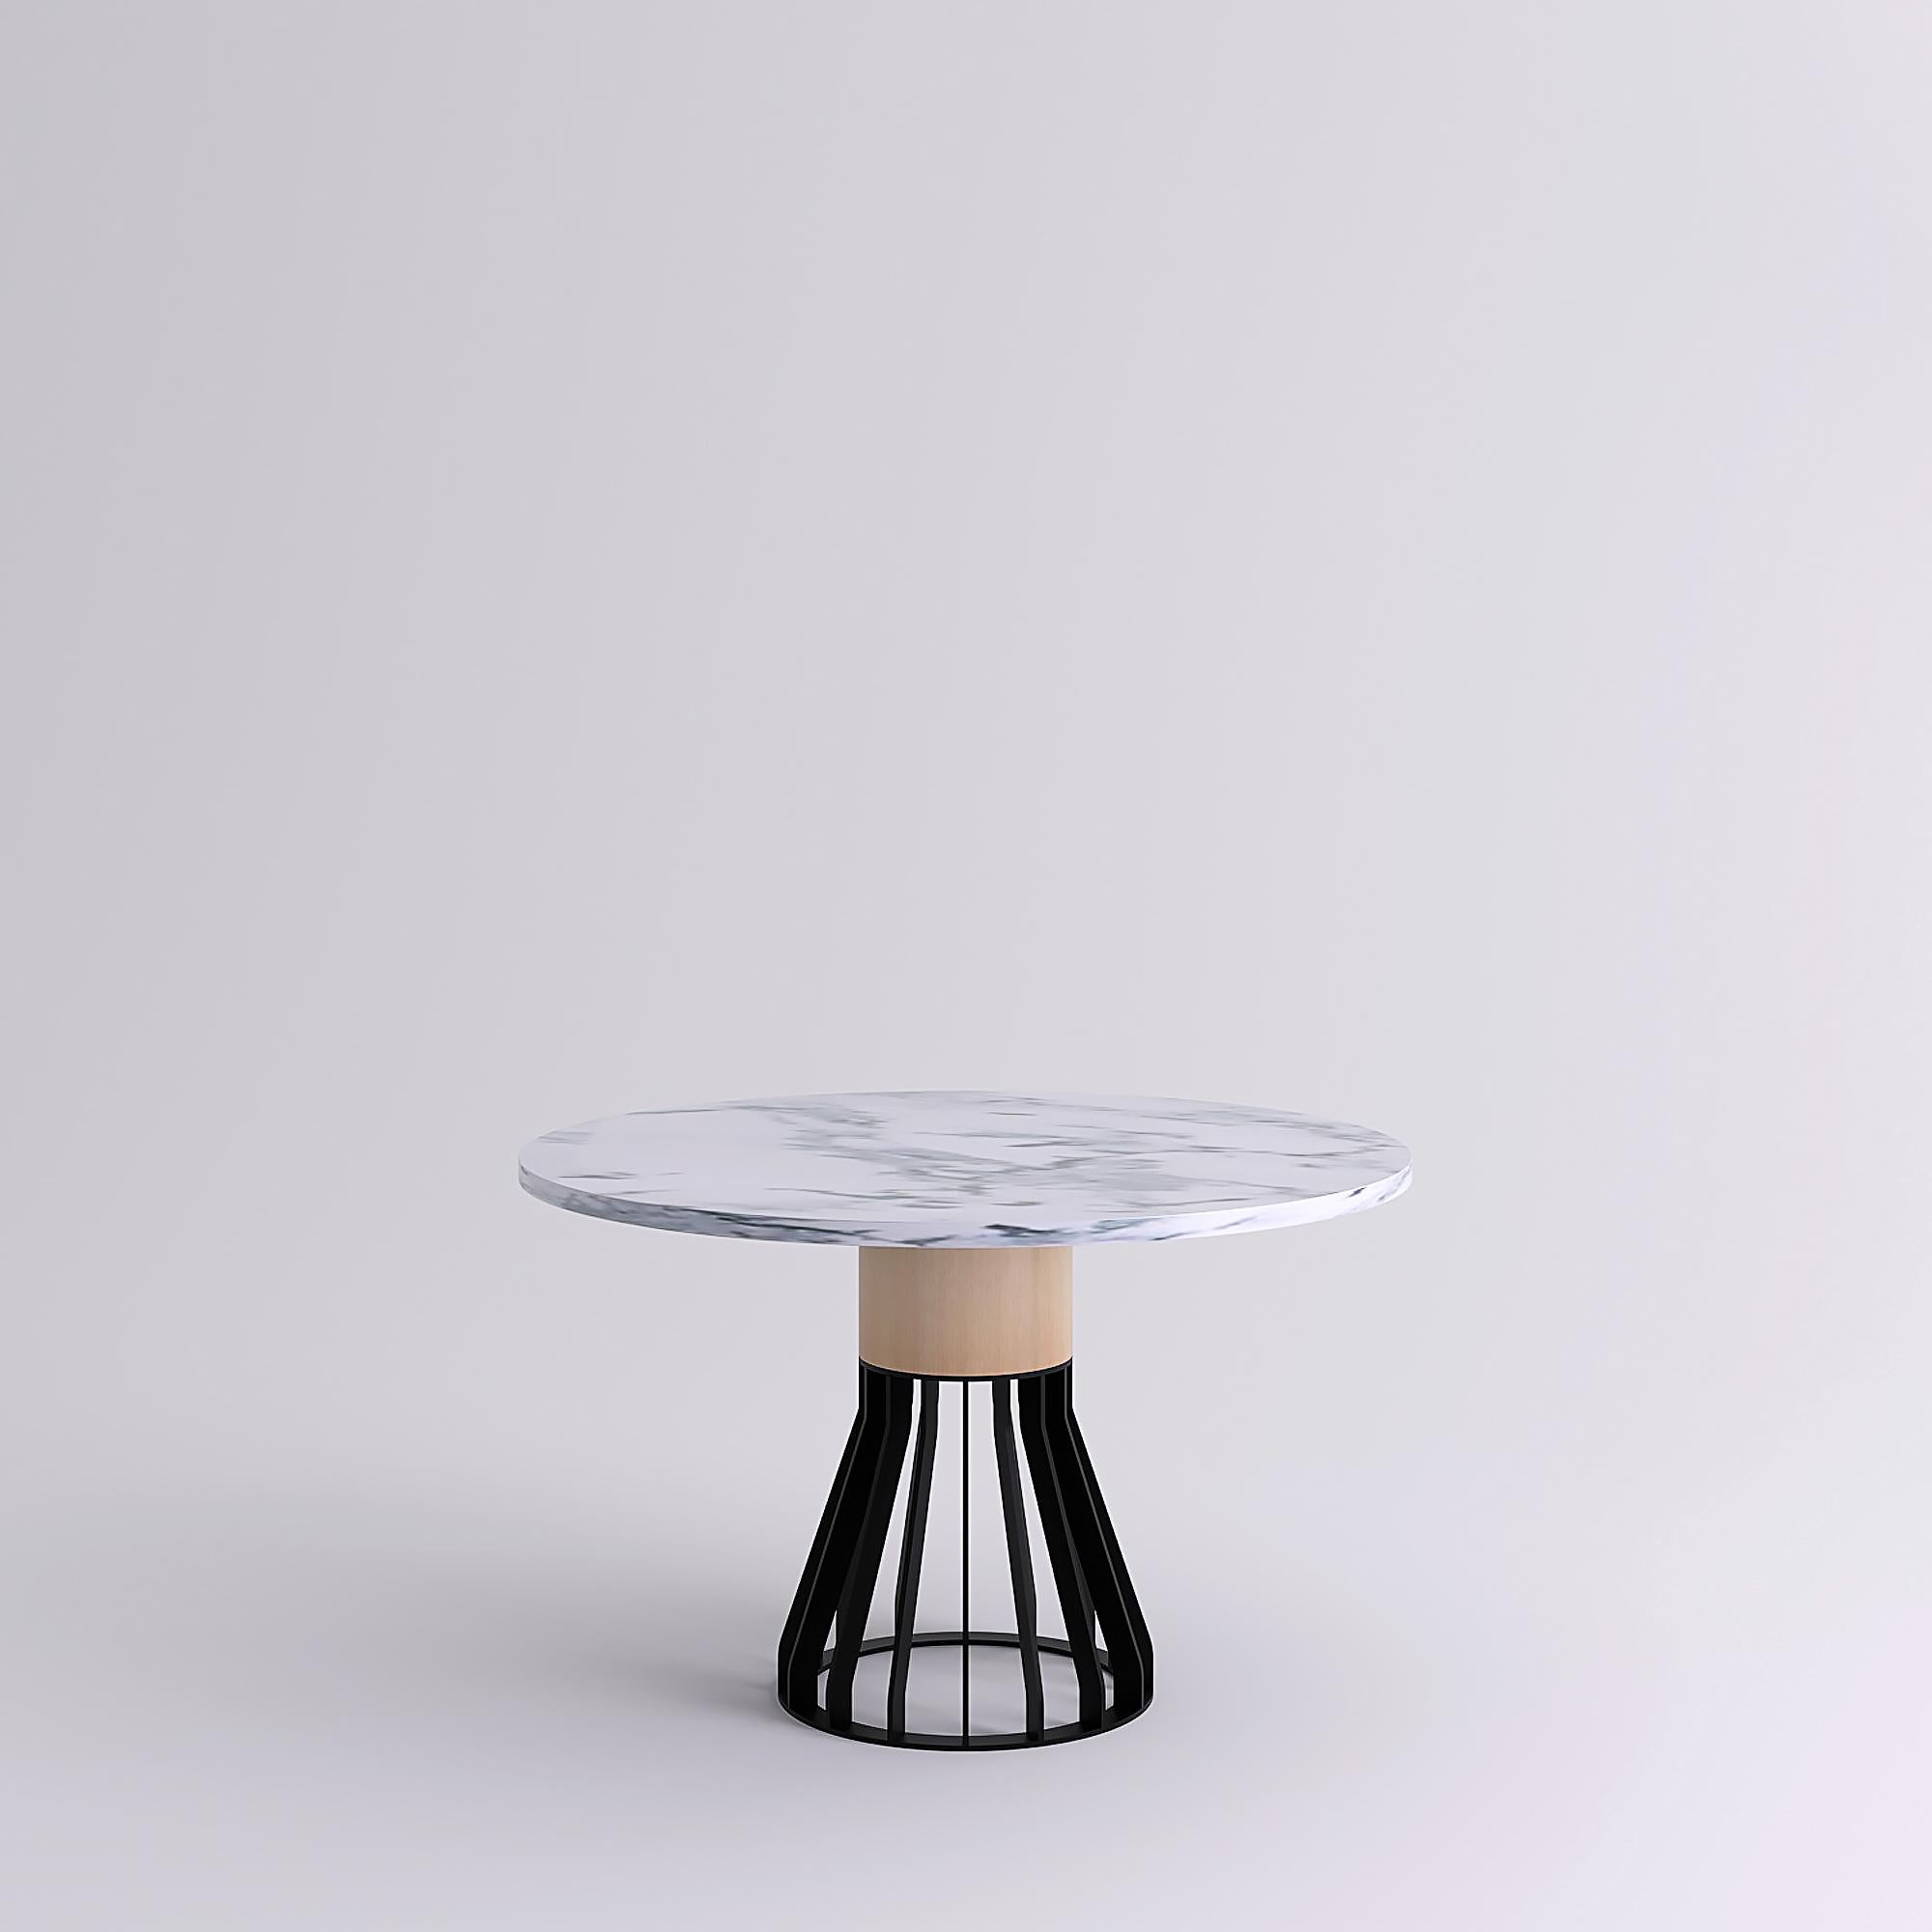 Mewoma is a family of tables with a sculptural presence.
The table combines a laser cut metal base topped by a large wooden column supporting the marble top.
The three materials gave the table its name : metal (ME), wood (WO) and marble